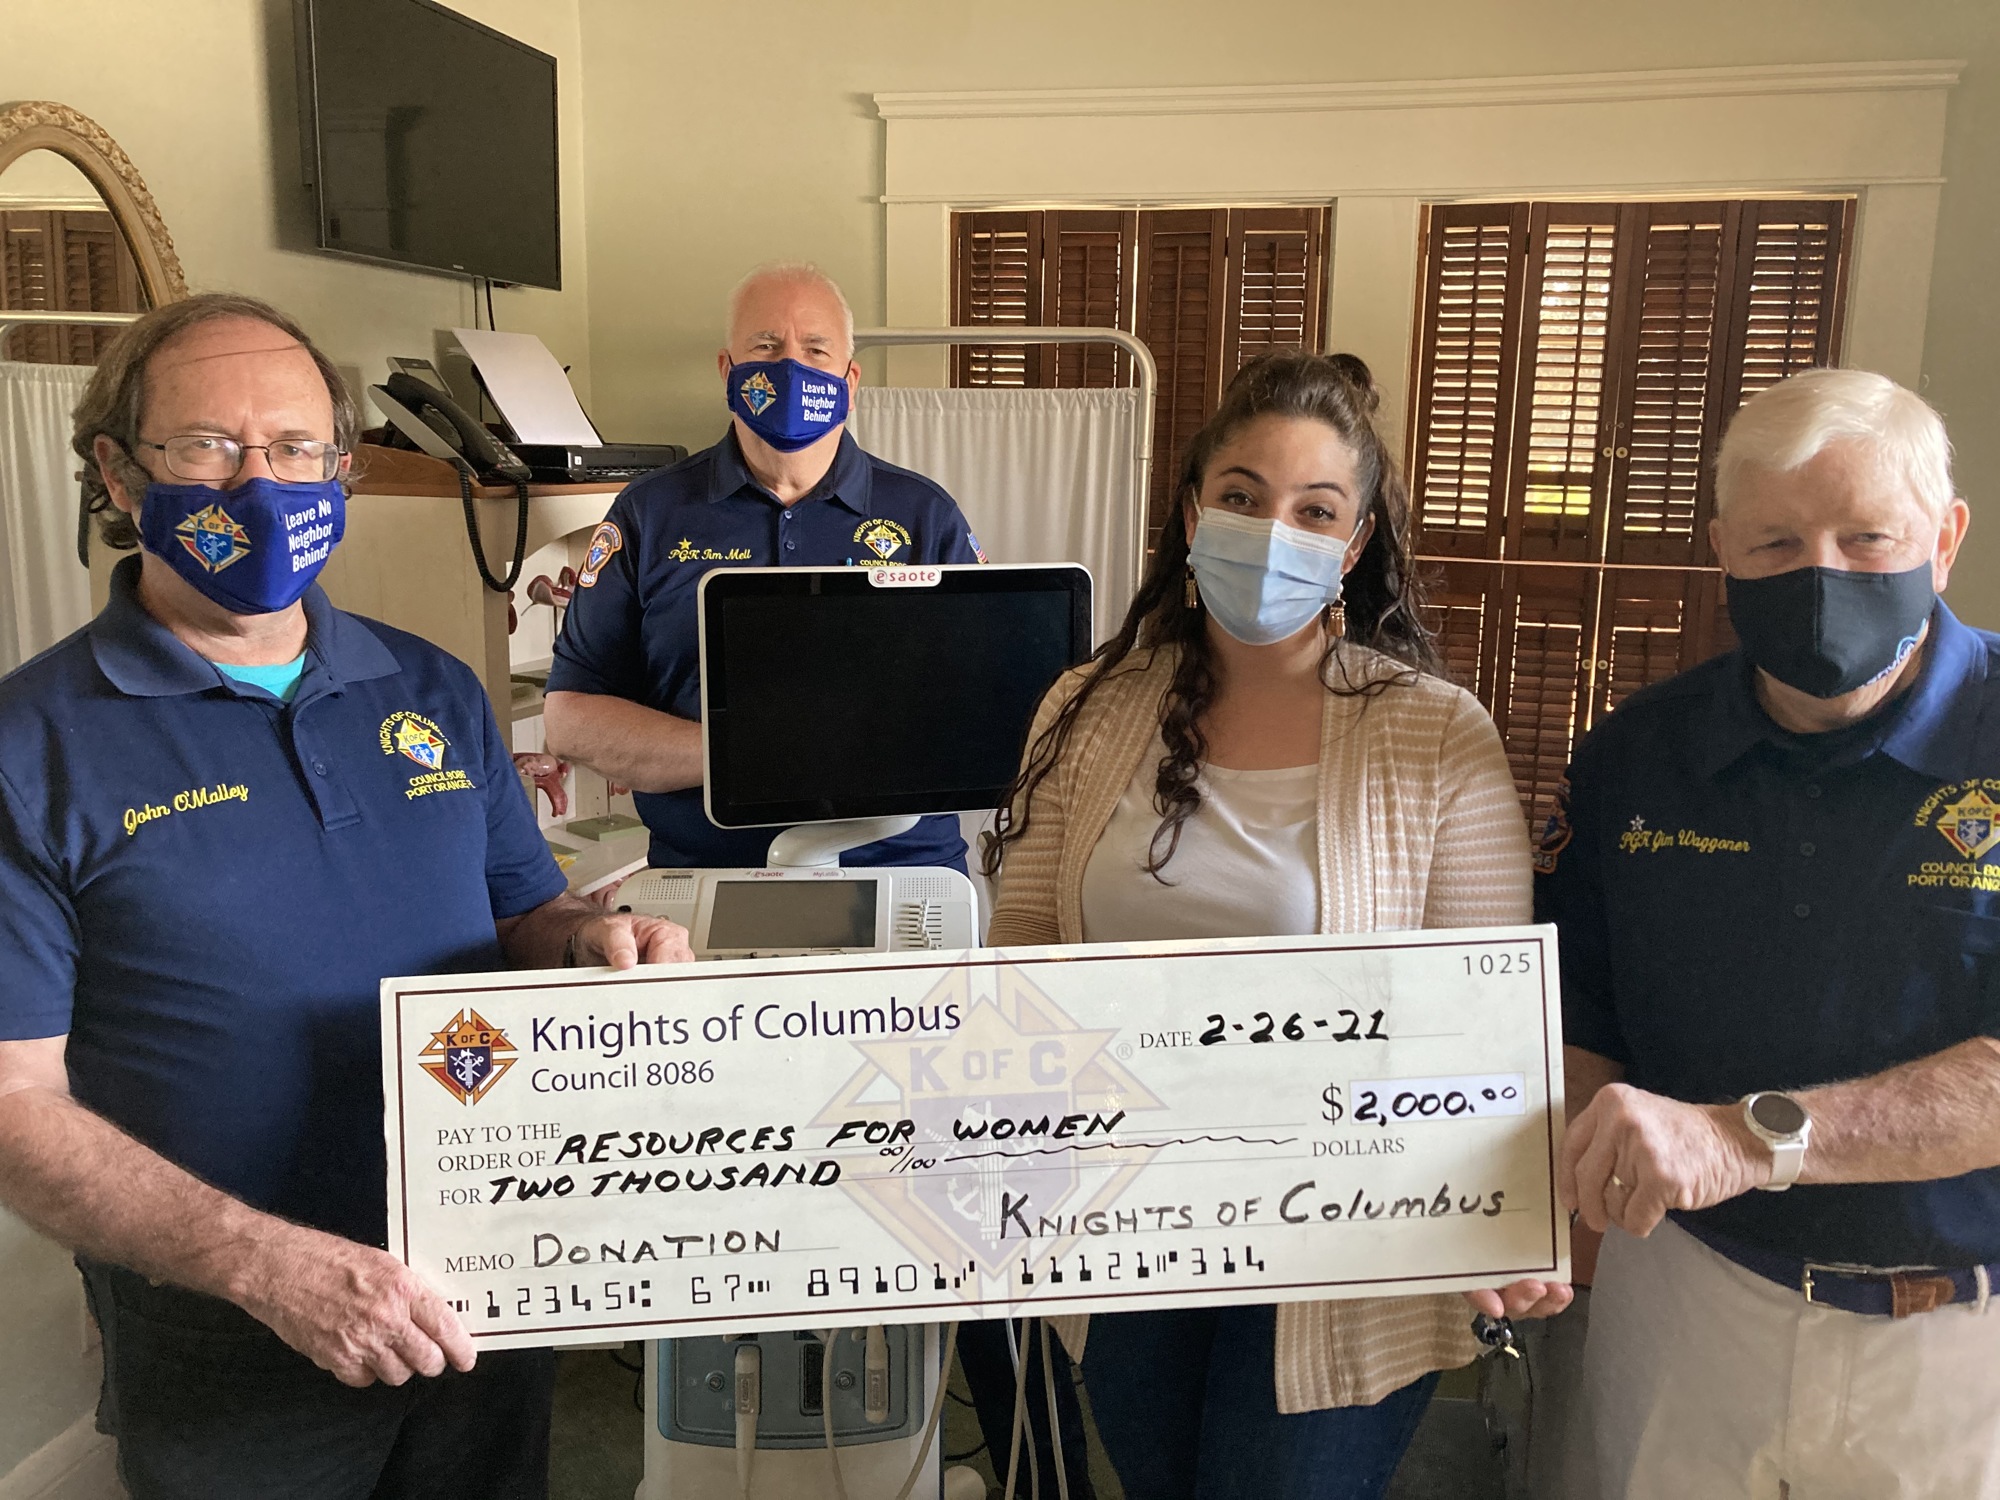 Council 8086 officers Grand Knight John O’Malley, Program Director Tim Mell and Jim Waggoner present a check for $2,000 to Resources for Women Executive Director Paola Sanchez. Courtesy photo